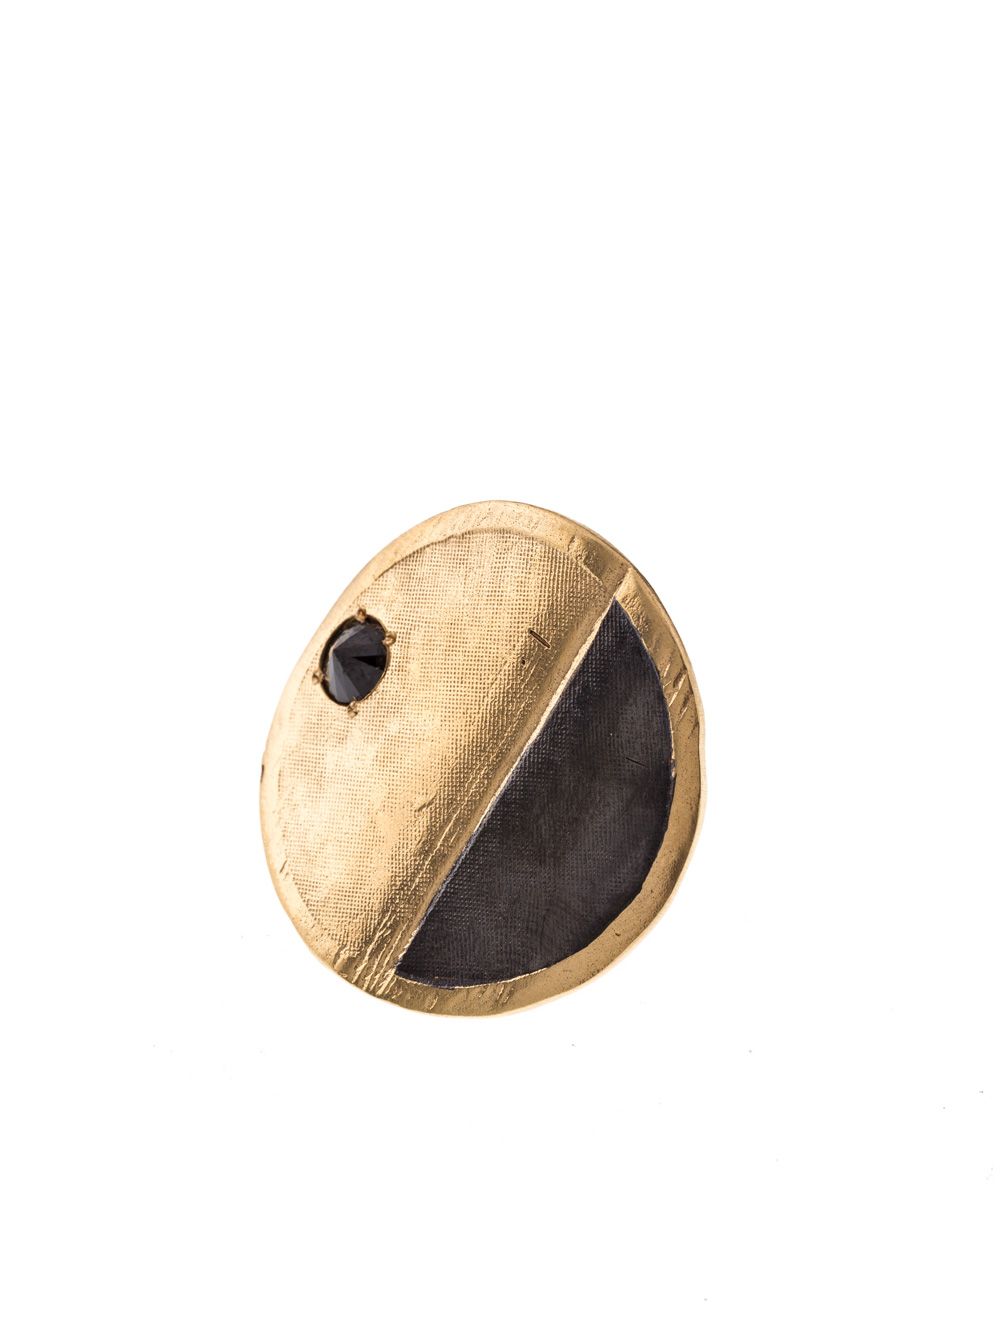 Original flat key shaped ring with stone seen from the front